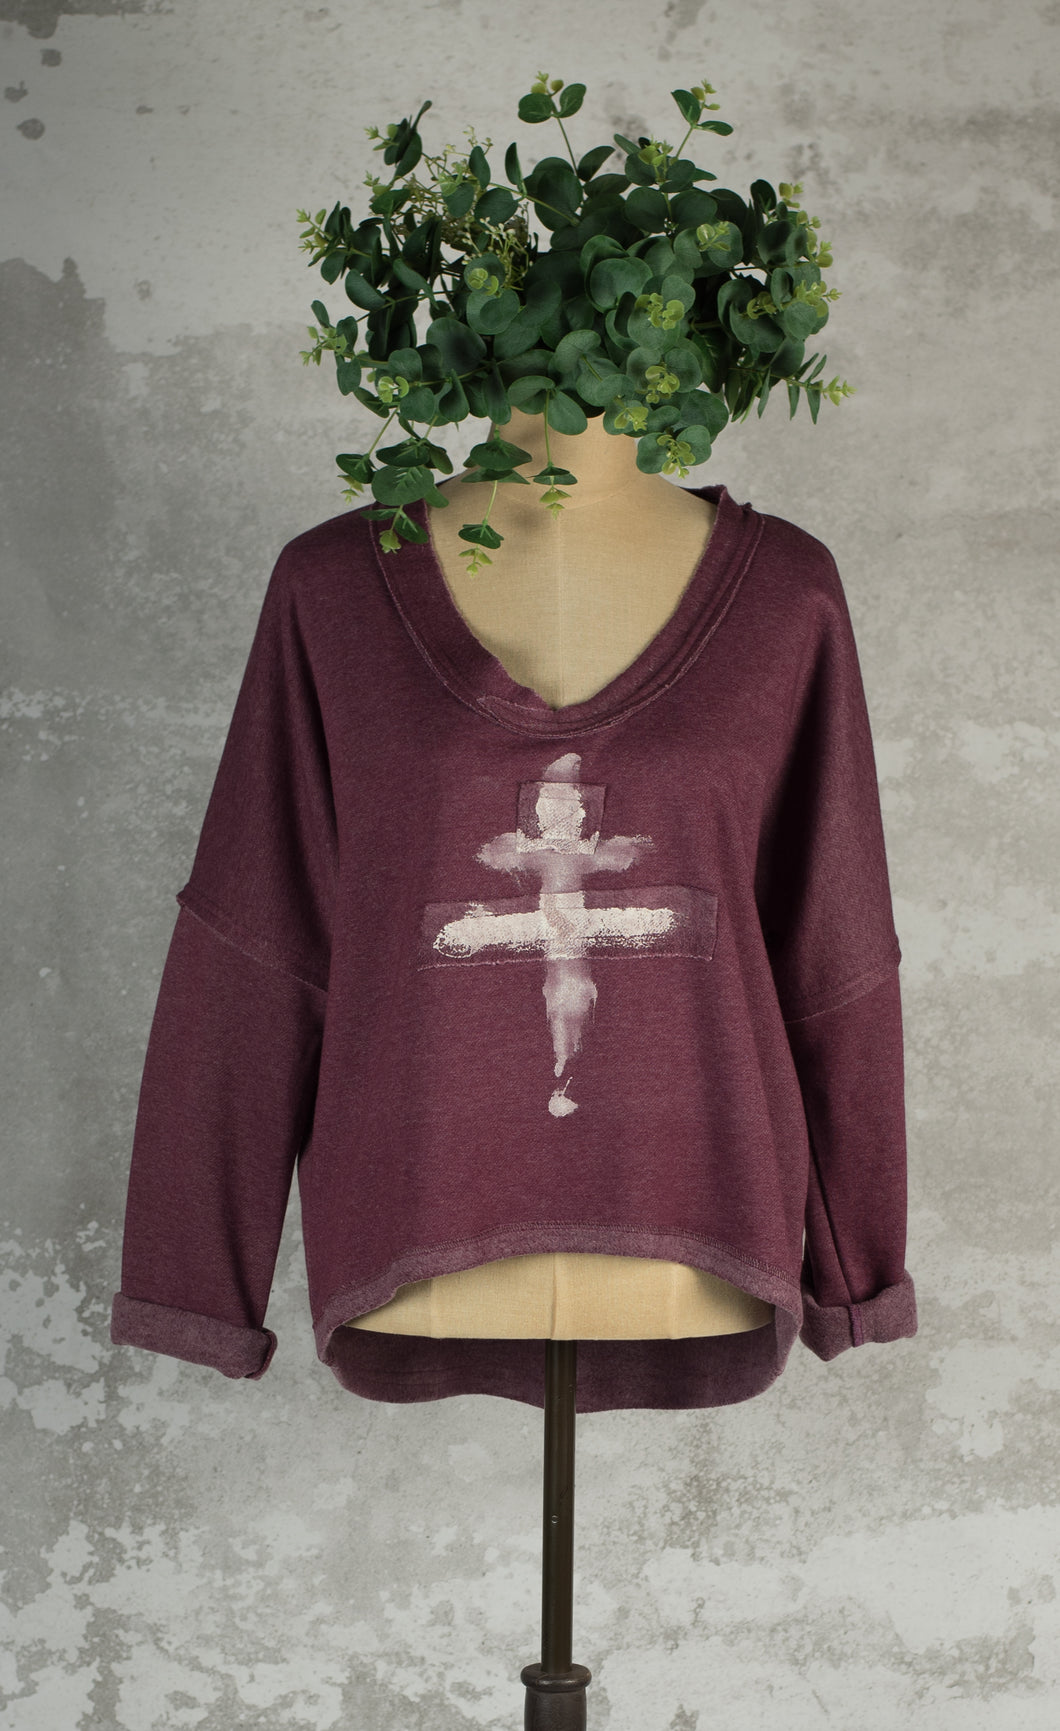 Plum brushed cotton sweatshirt with hand painted detail